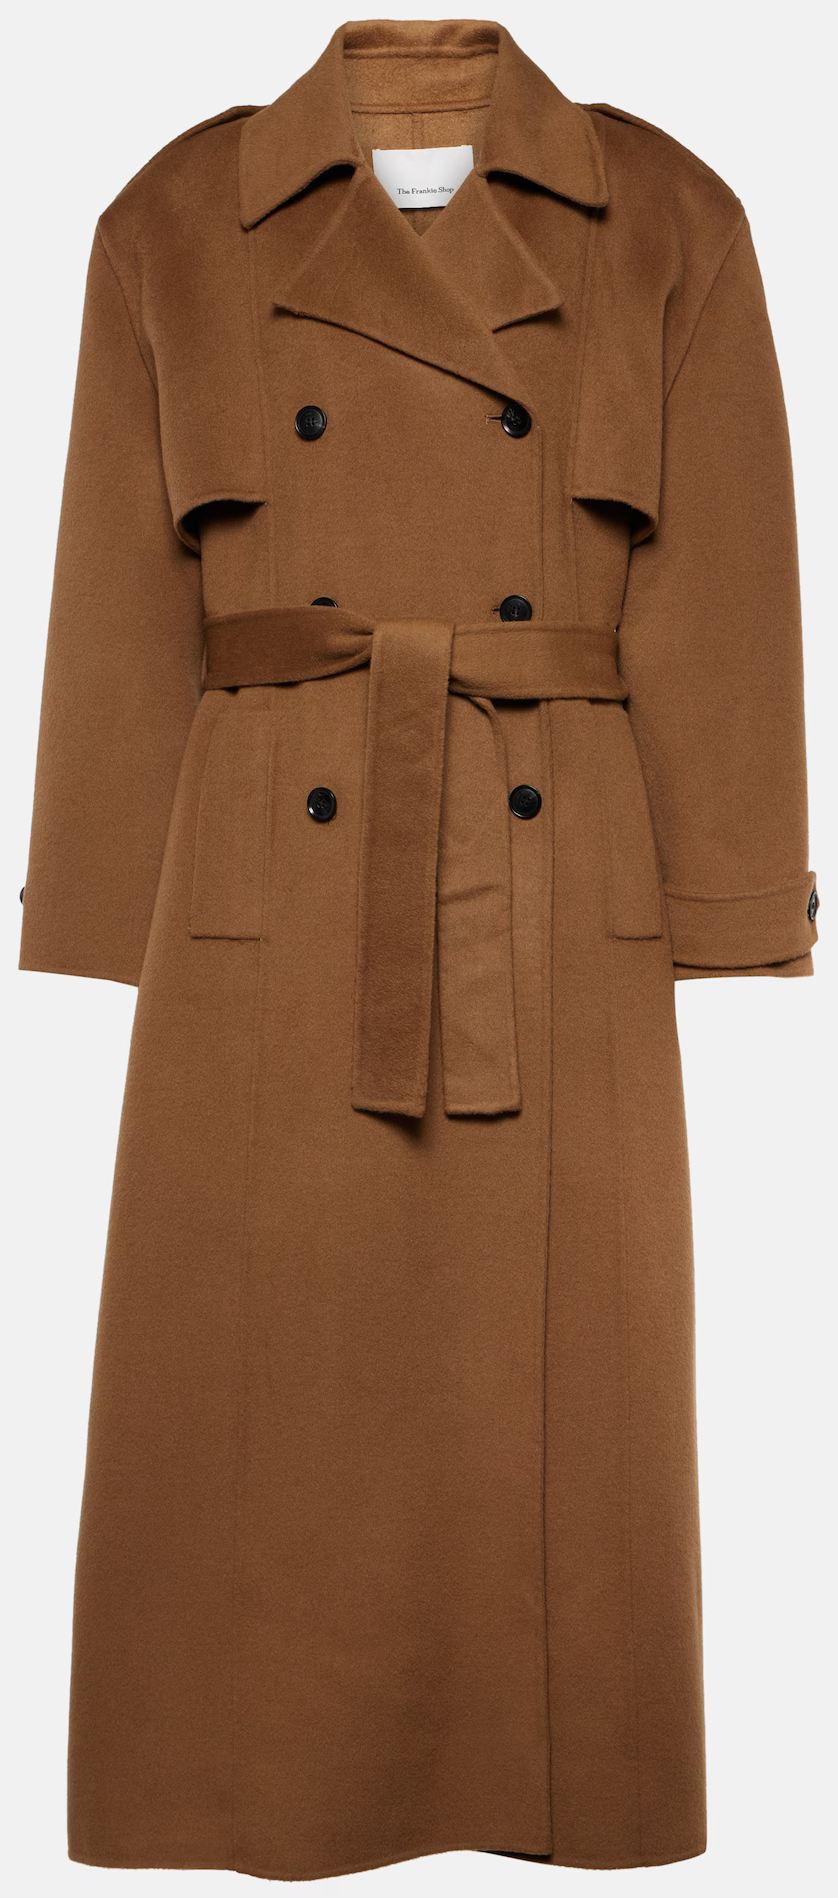 The Frankie Shop Nikola Wool and Cashmere Trench Coat